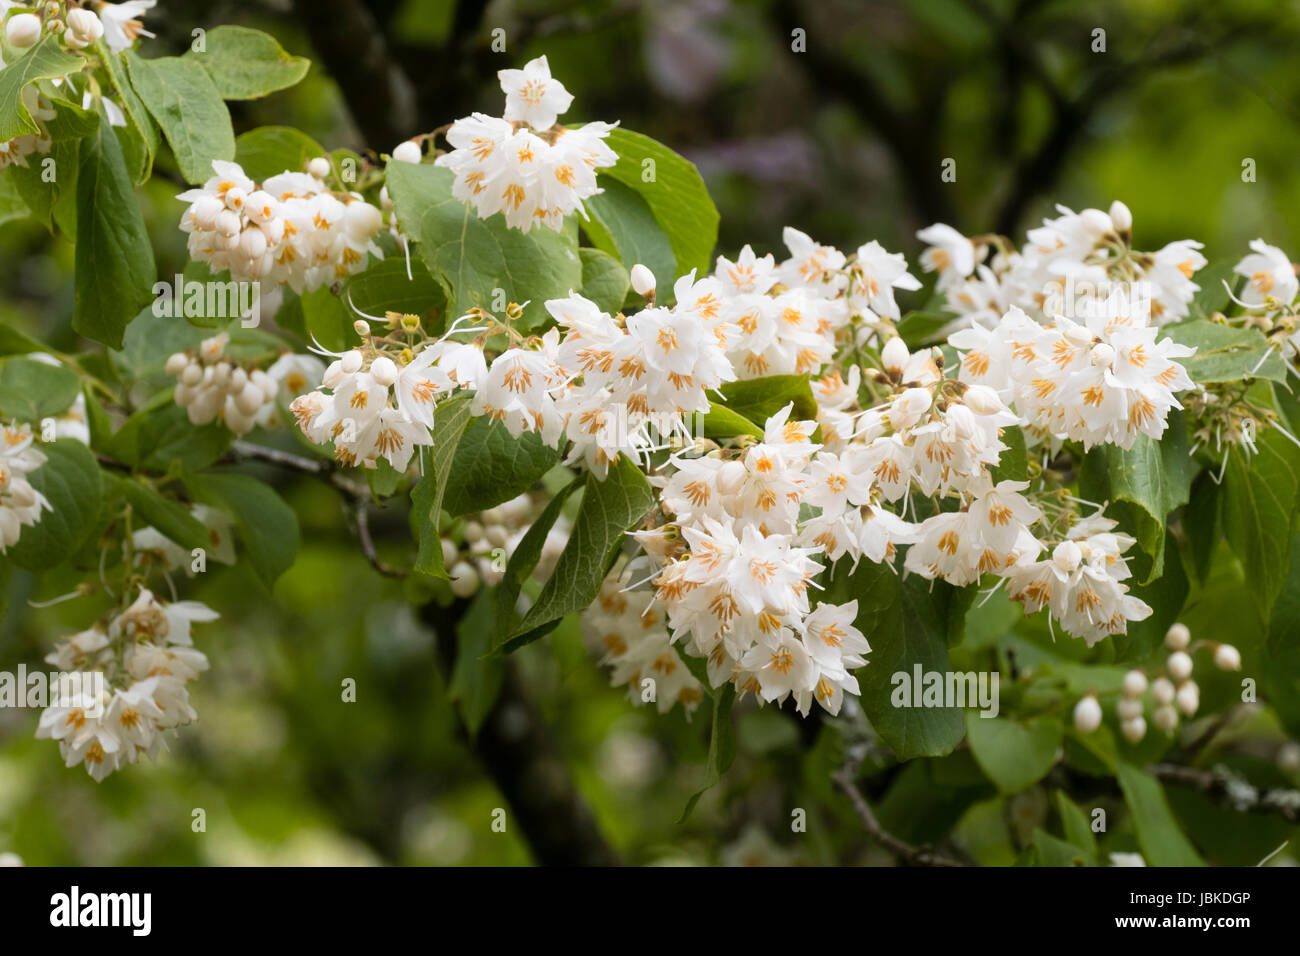 June flowers and foliage of the fragrant snowbell tree, Styrax obassia Stock Photo